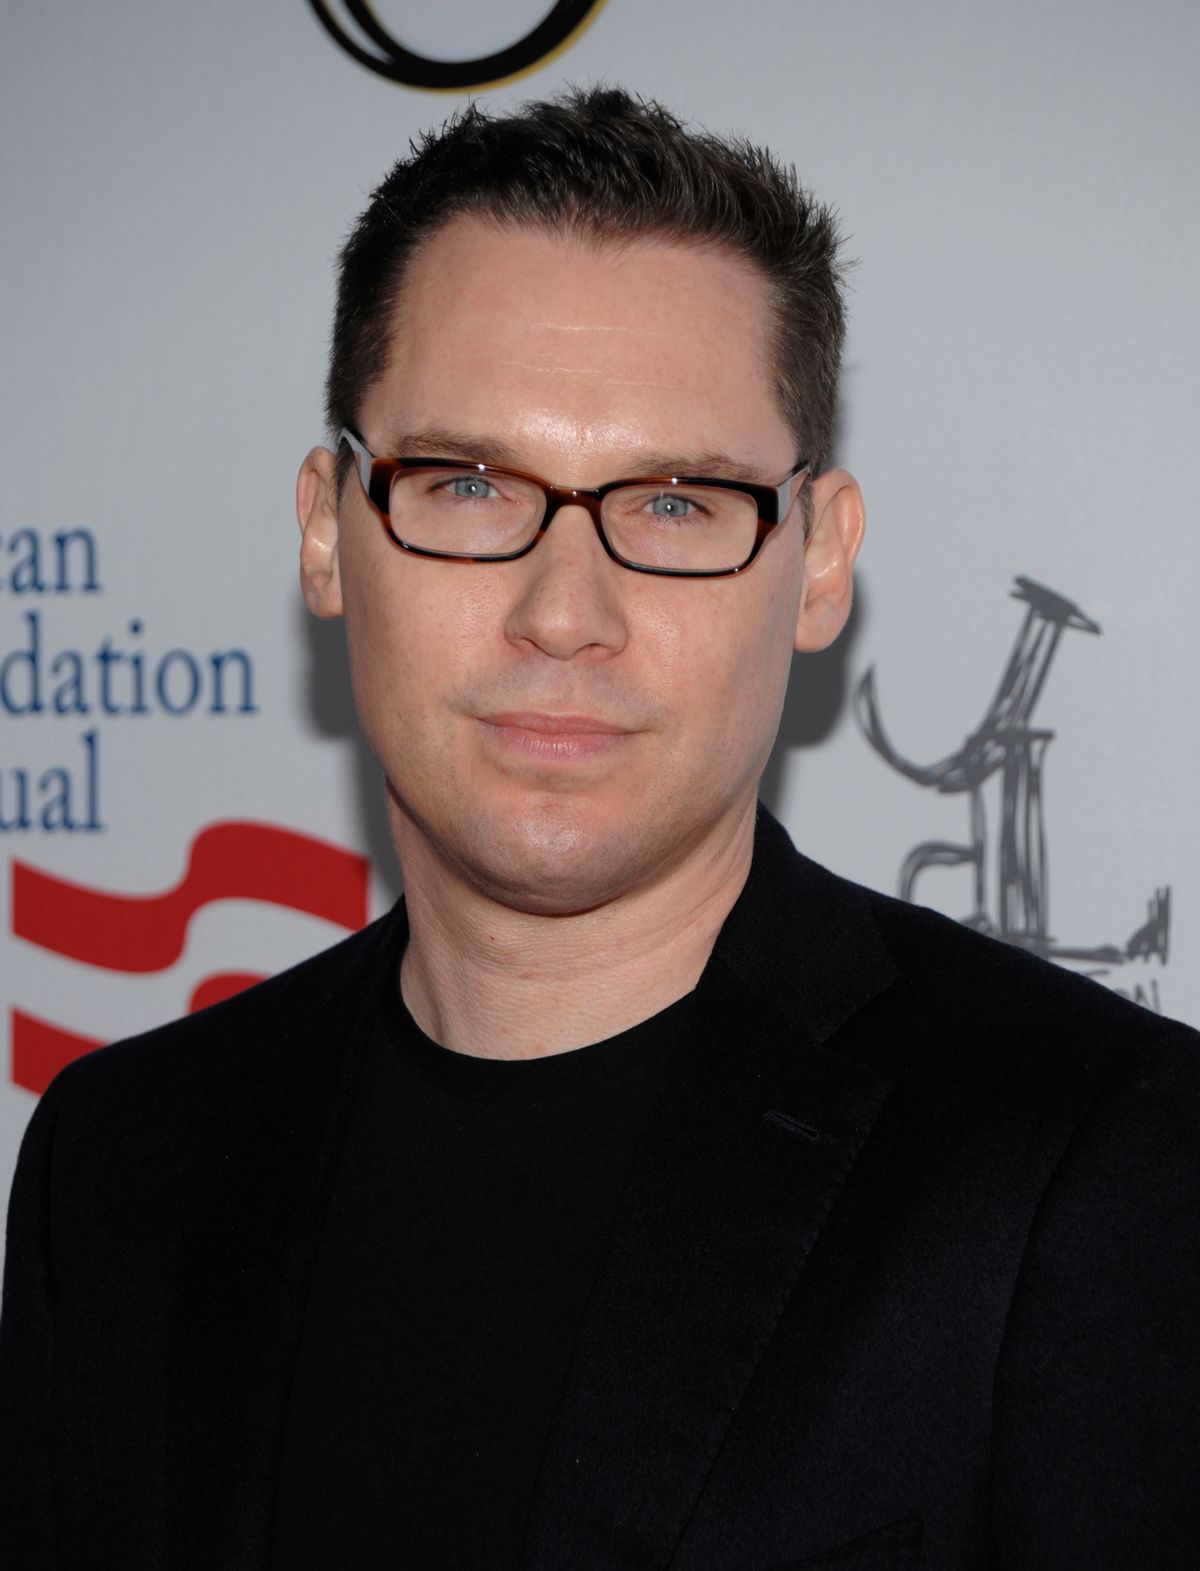 FILE - In this March 3, 2012 file photo, director Bryan Singer arrives at the Los Angeles premiere of the play "8" in Los Angeles.  Singer released a statement on Thursday, April 24, 2014, denying allegations by Michael Egan III that the director sexually assaulted him when he was underage in 1999 and called them "outrageous, vicious and completely false." The director of the upcoming film "X-Men: Days of Future Past" also said he is avoiding media promotions of the film to avoid creating a distraction. (AP Photo/Dan Steinberg, file) (AP)